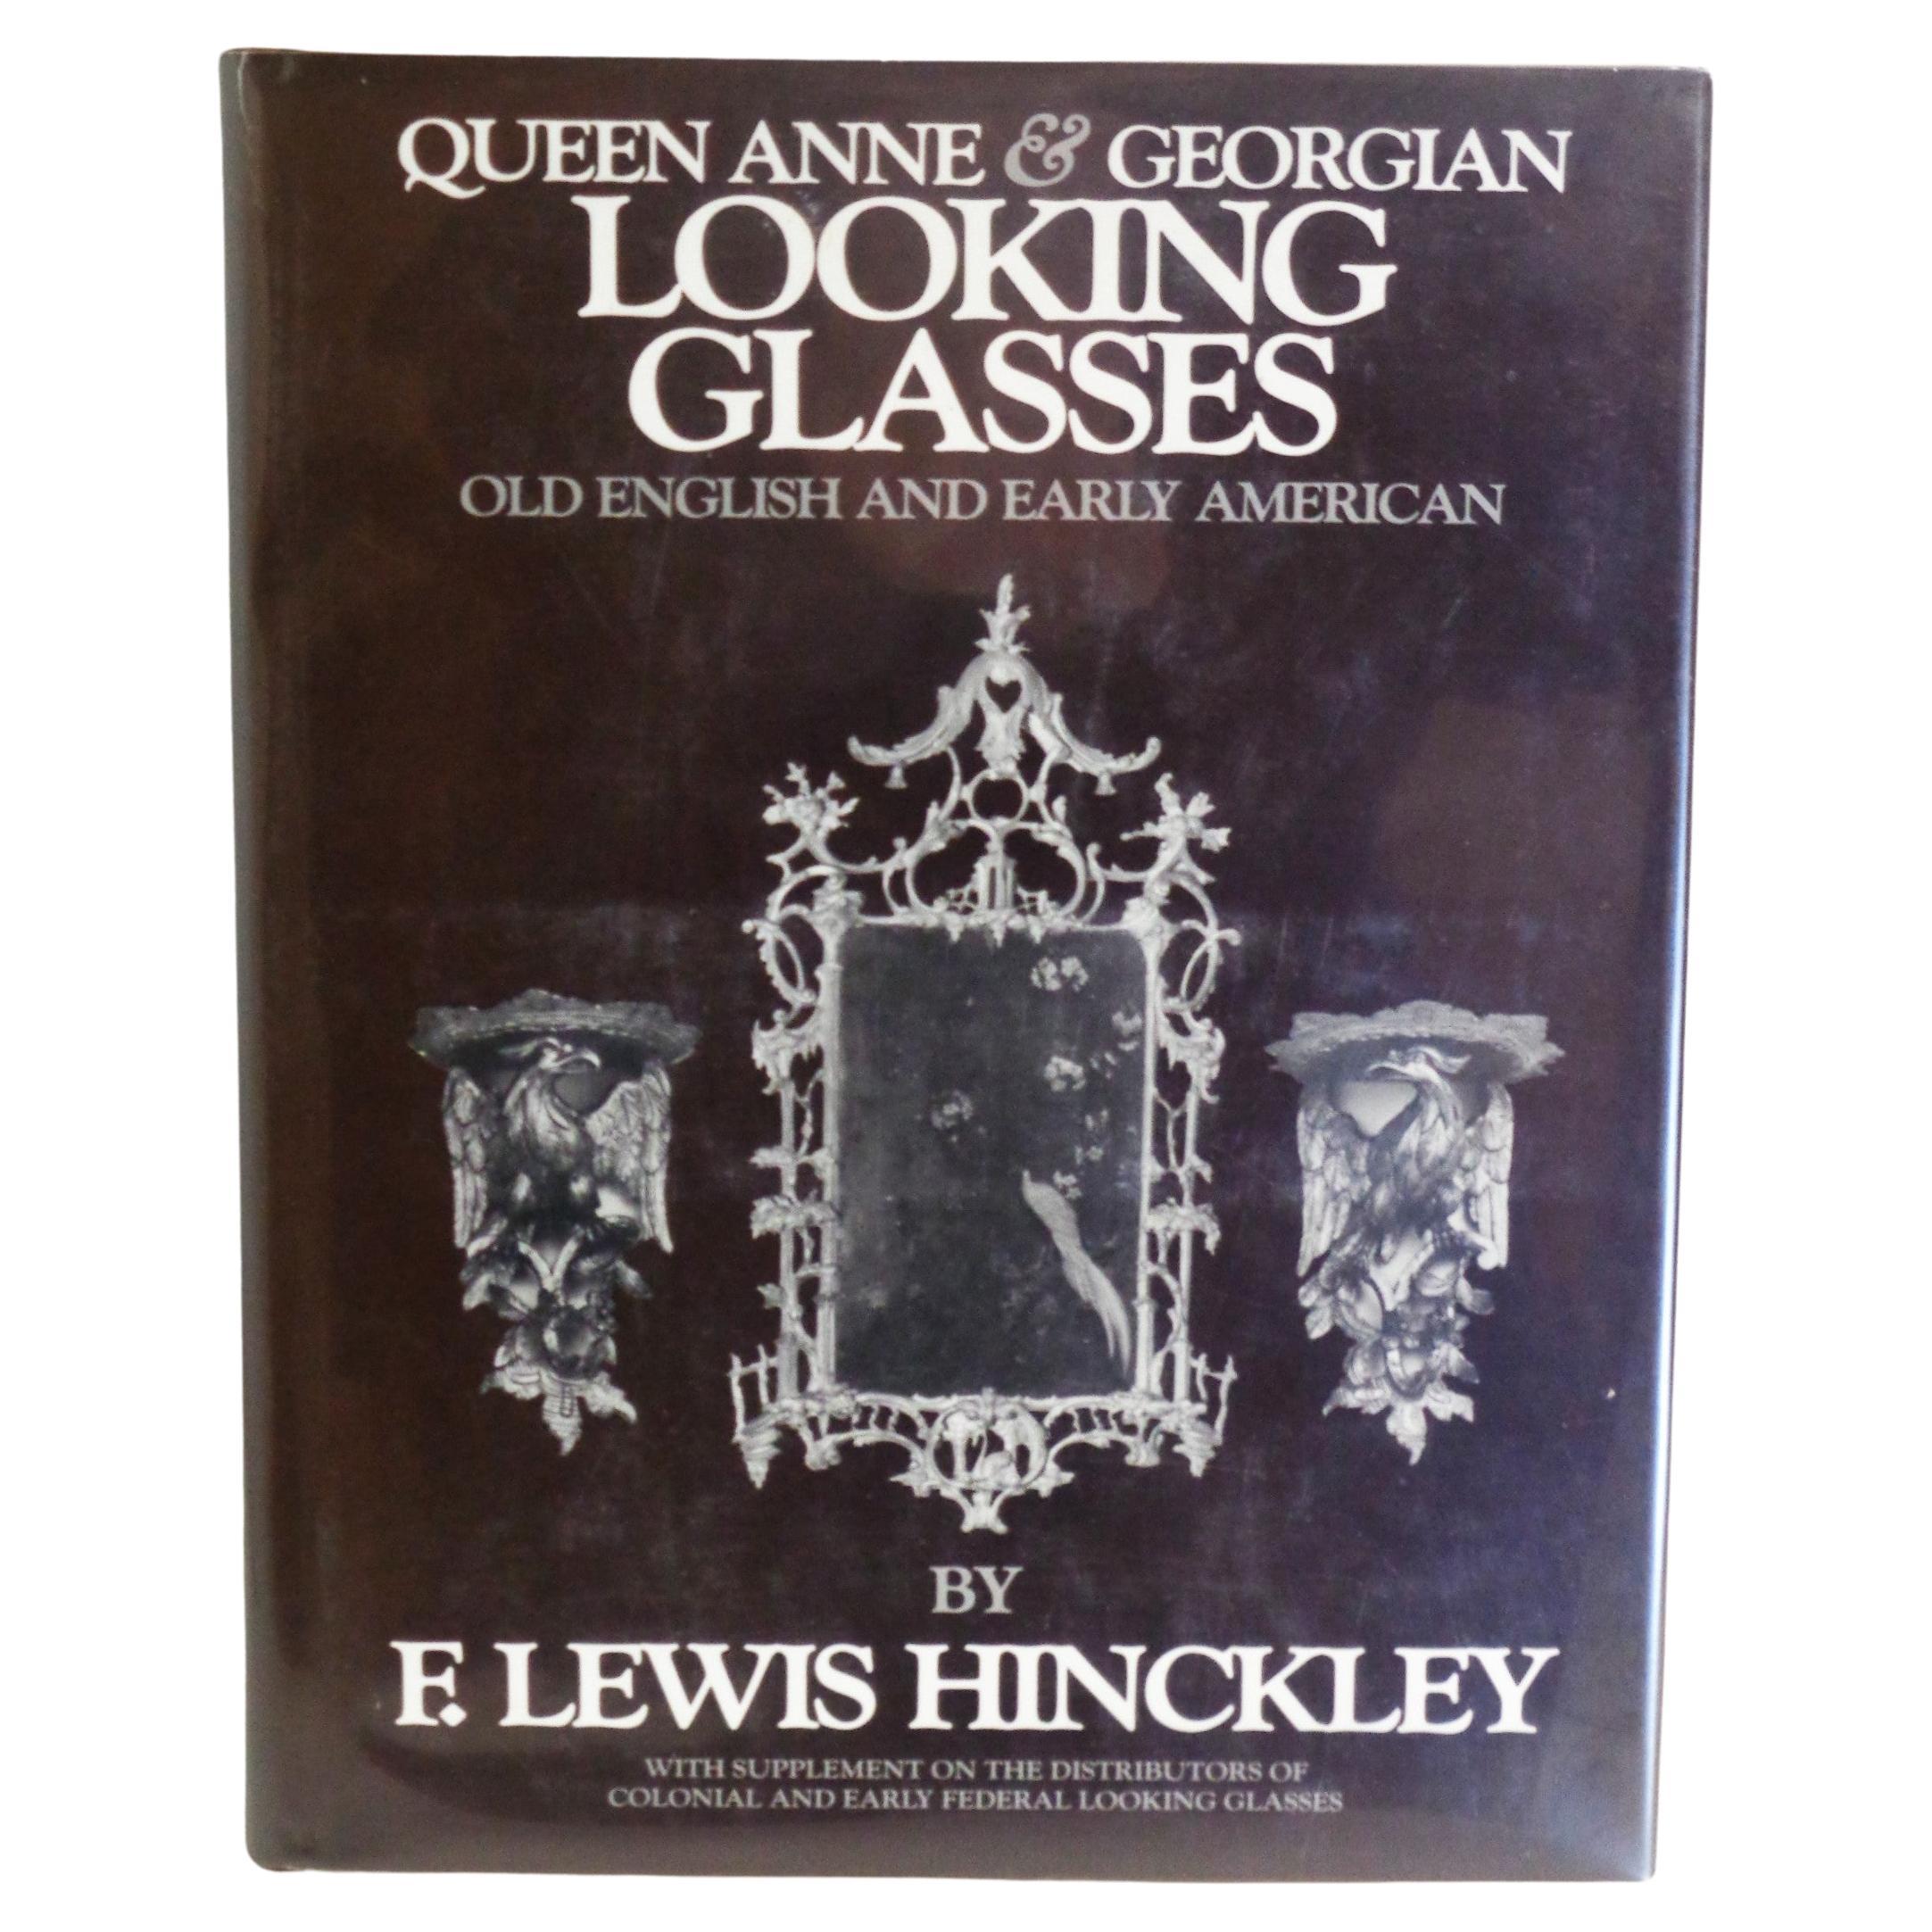 Queen Anne & Georgian Looking Glasses - Hinckley - 1990 Tauris - 1st Edition For Sale